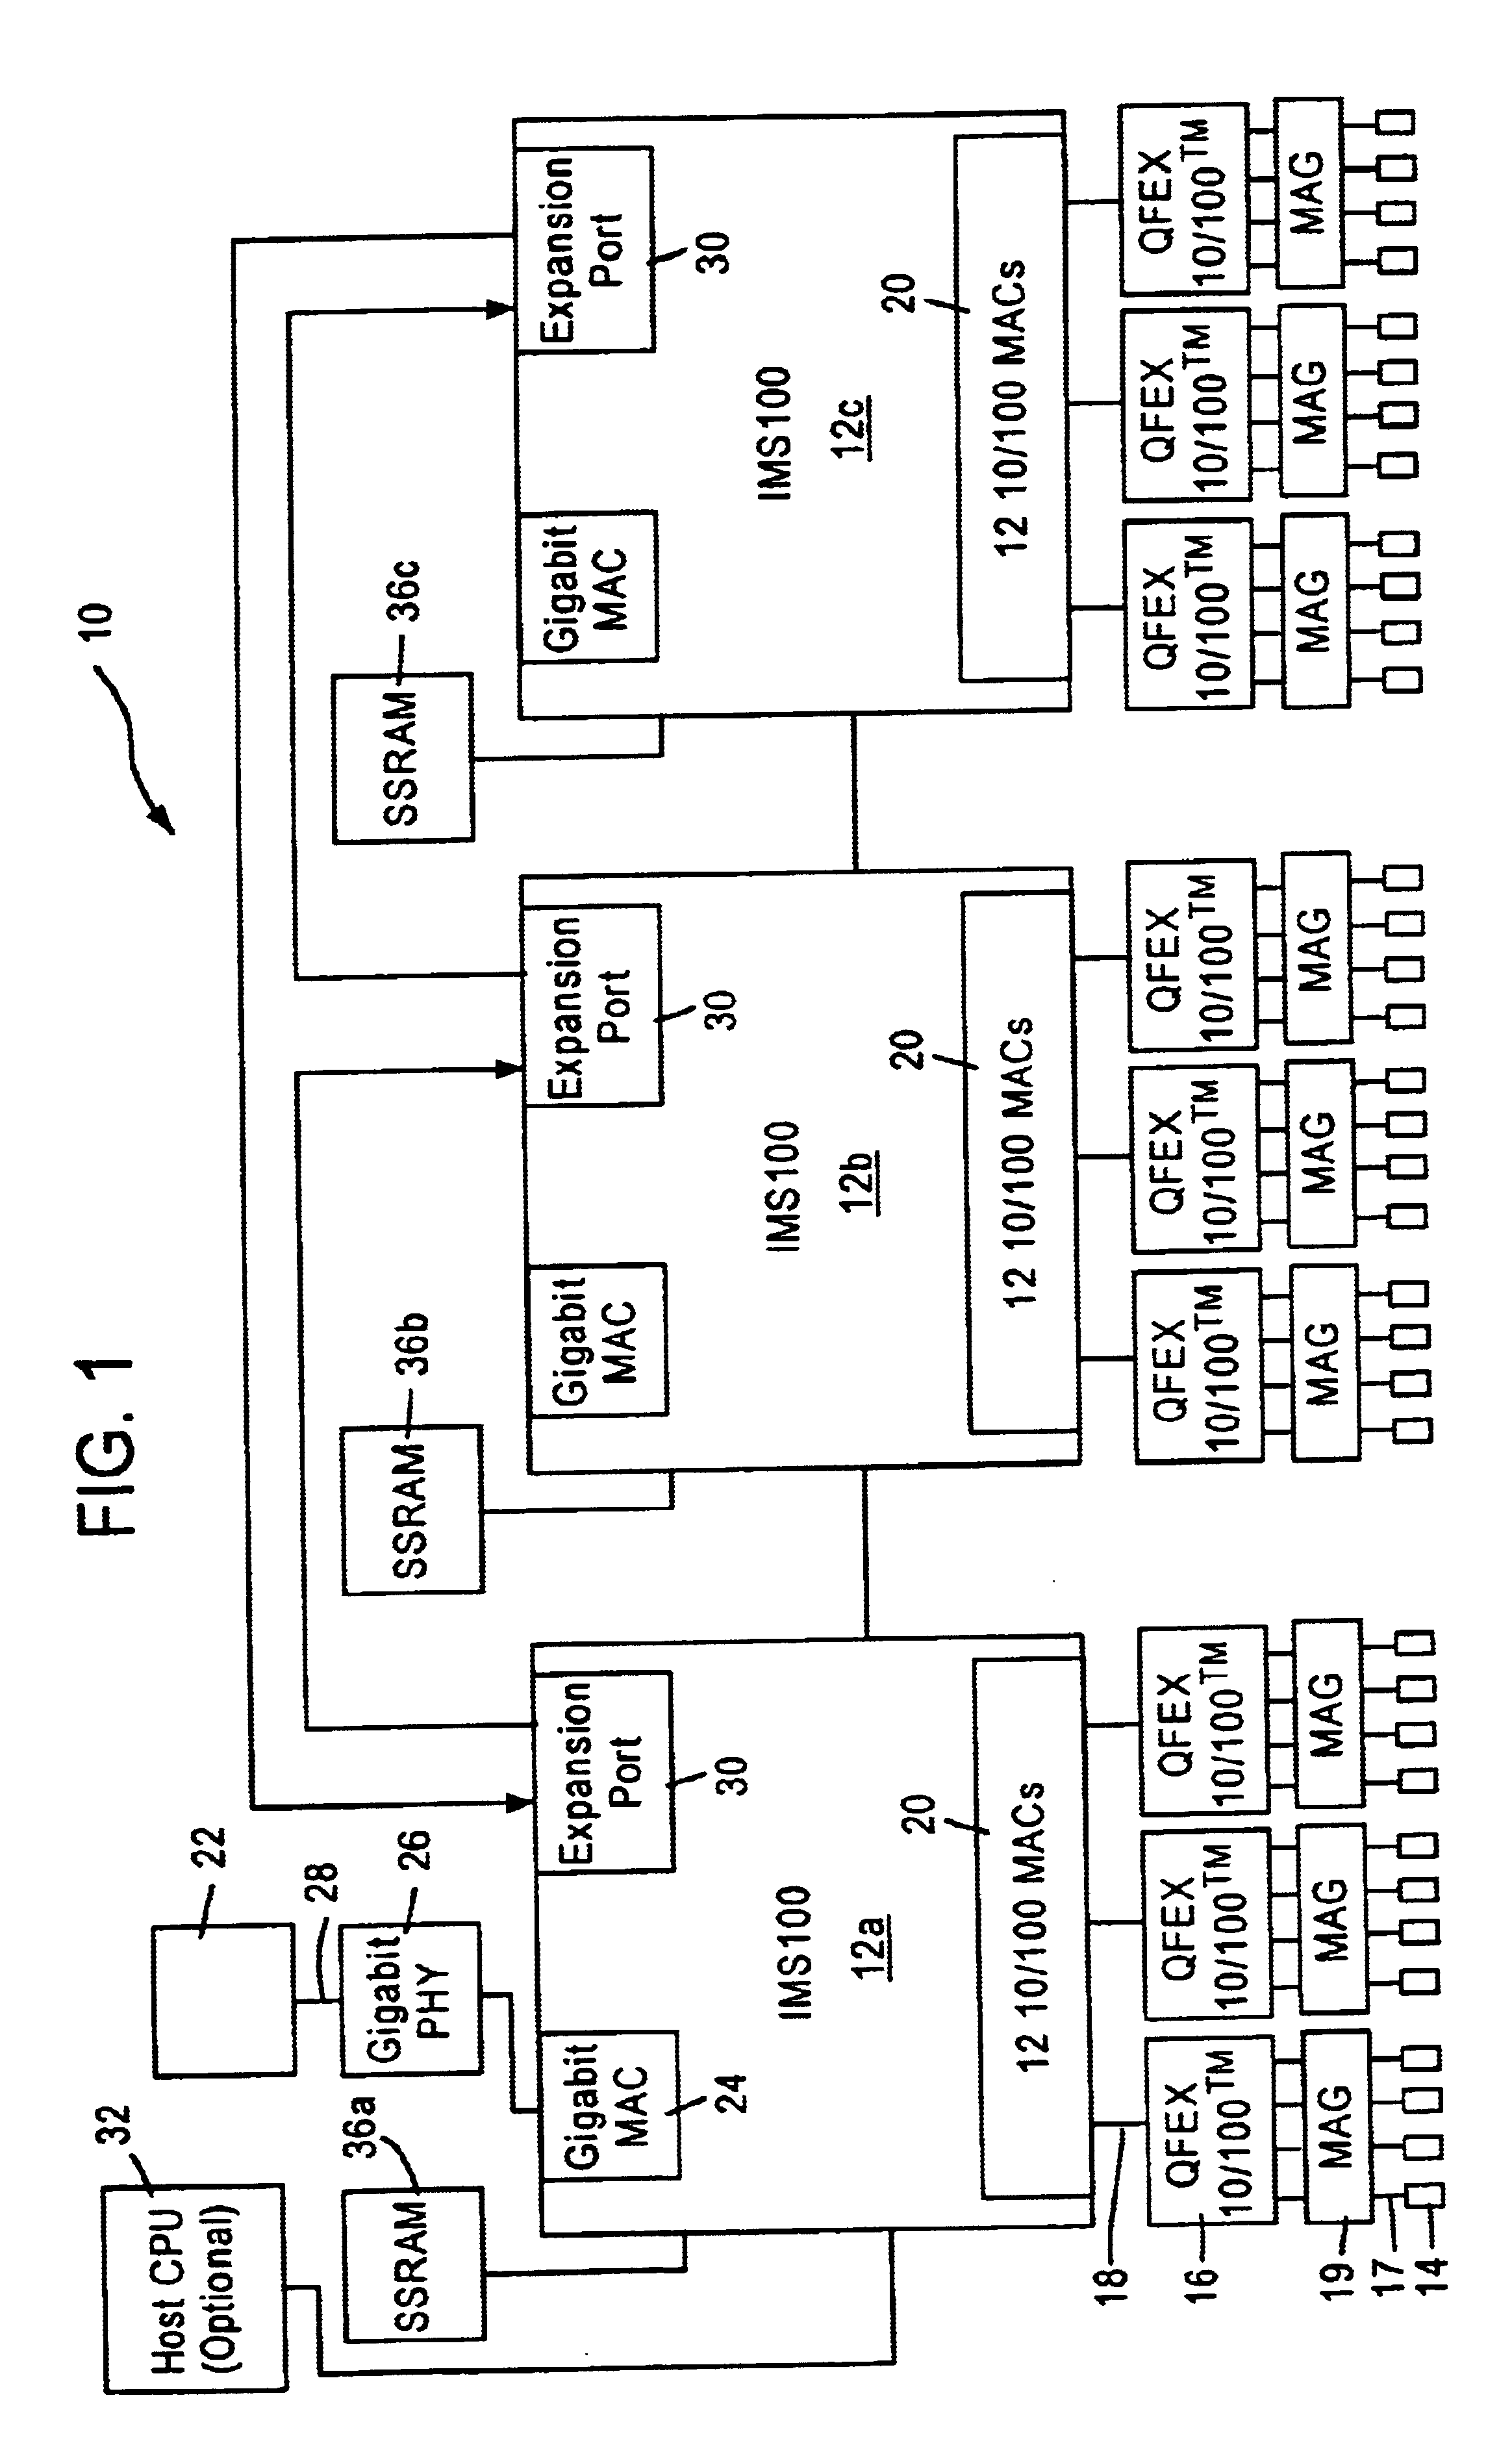 Method and apparatus for maintaining randomly accessible free buffer information for a network switch